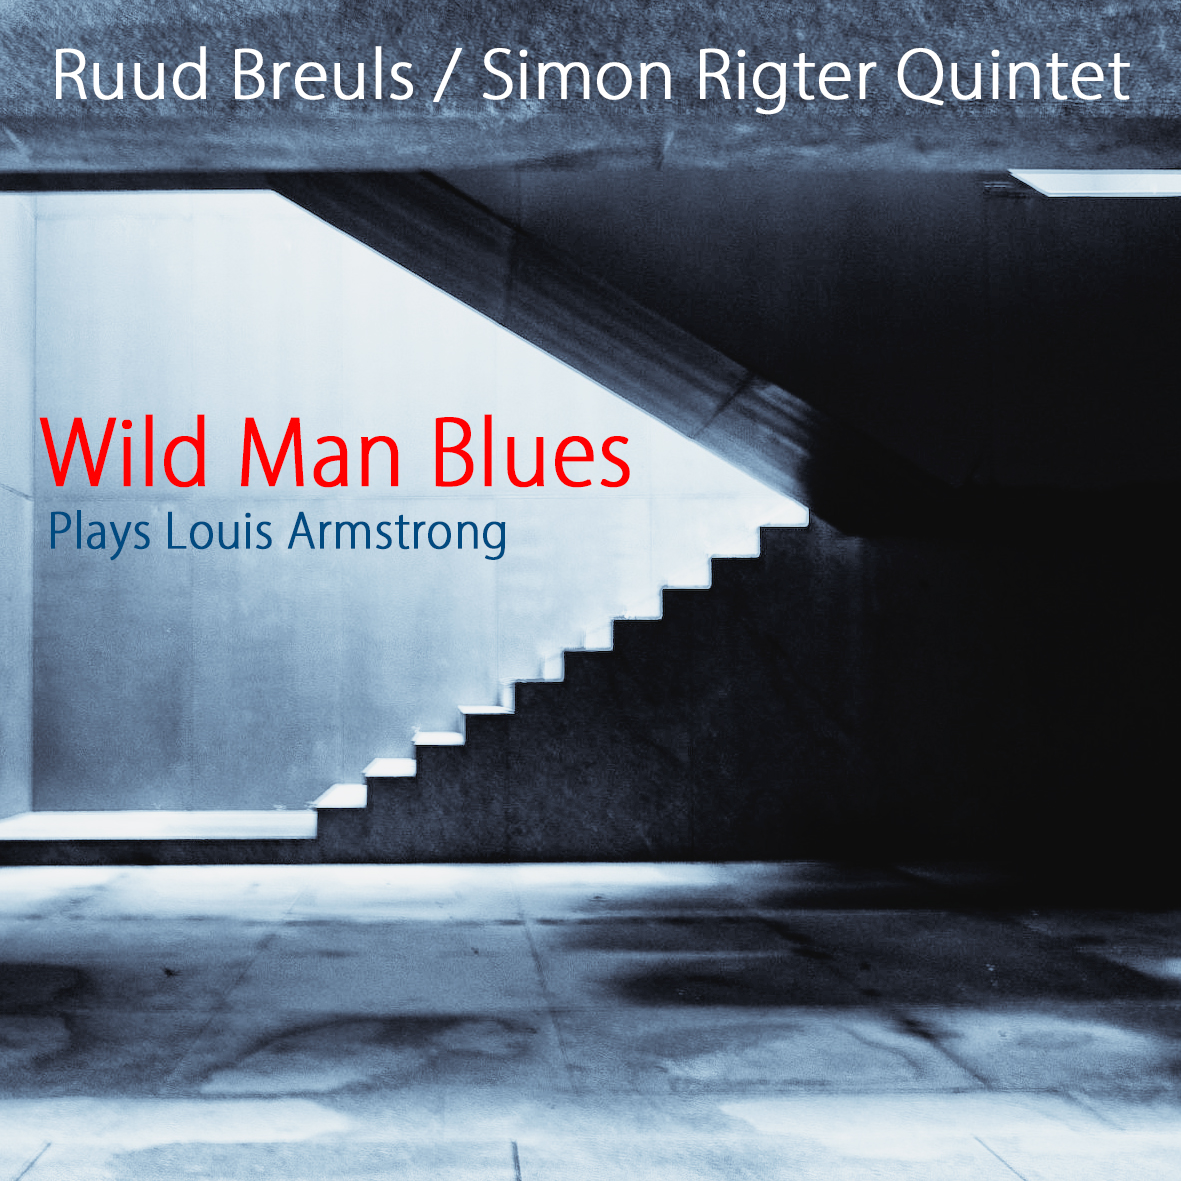 Ruud Breuls, Simon Rigter Quintet - Wild Man Blues: Plays Louis Armstrong (2016) [FLAC 24bit/352,8kHz]